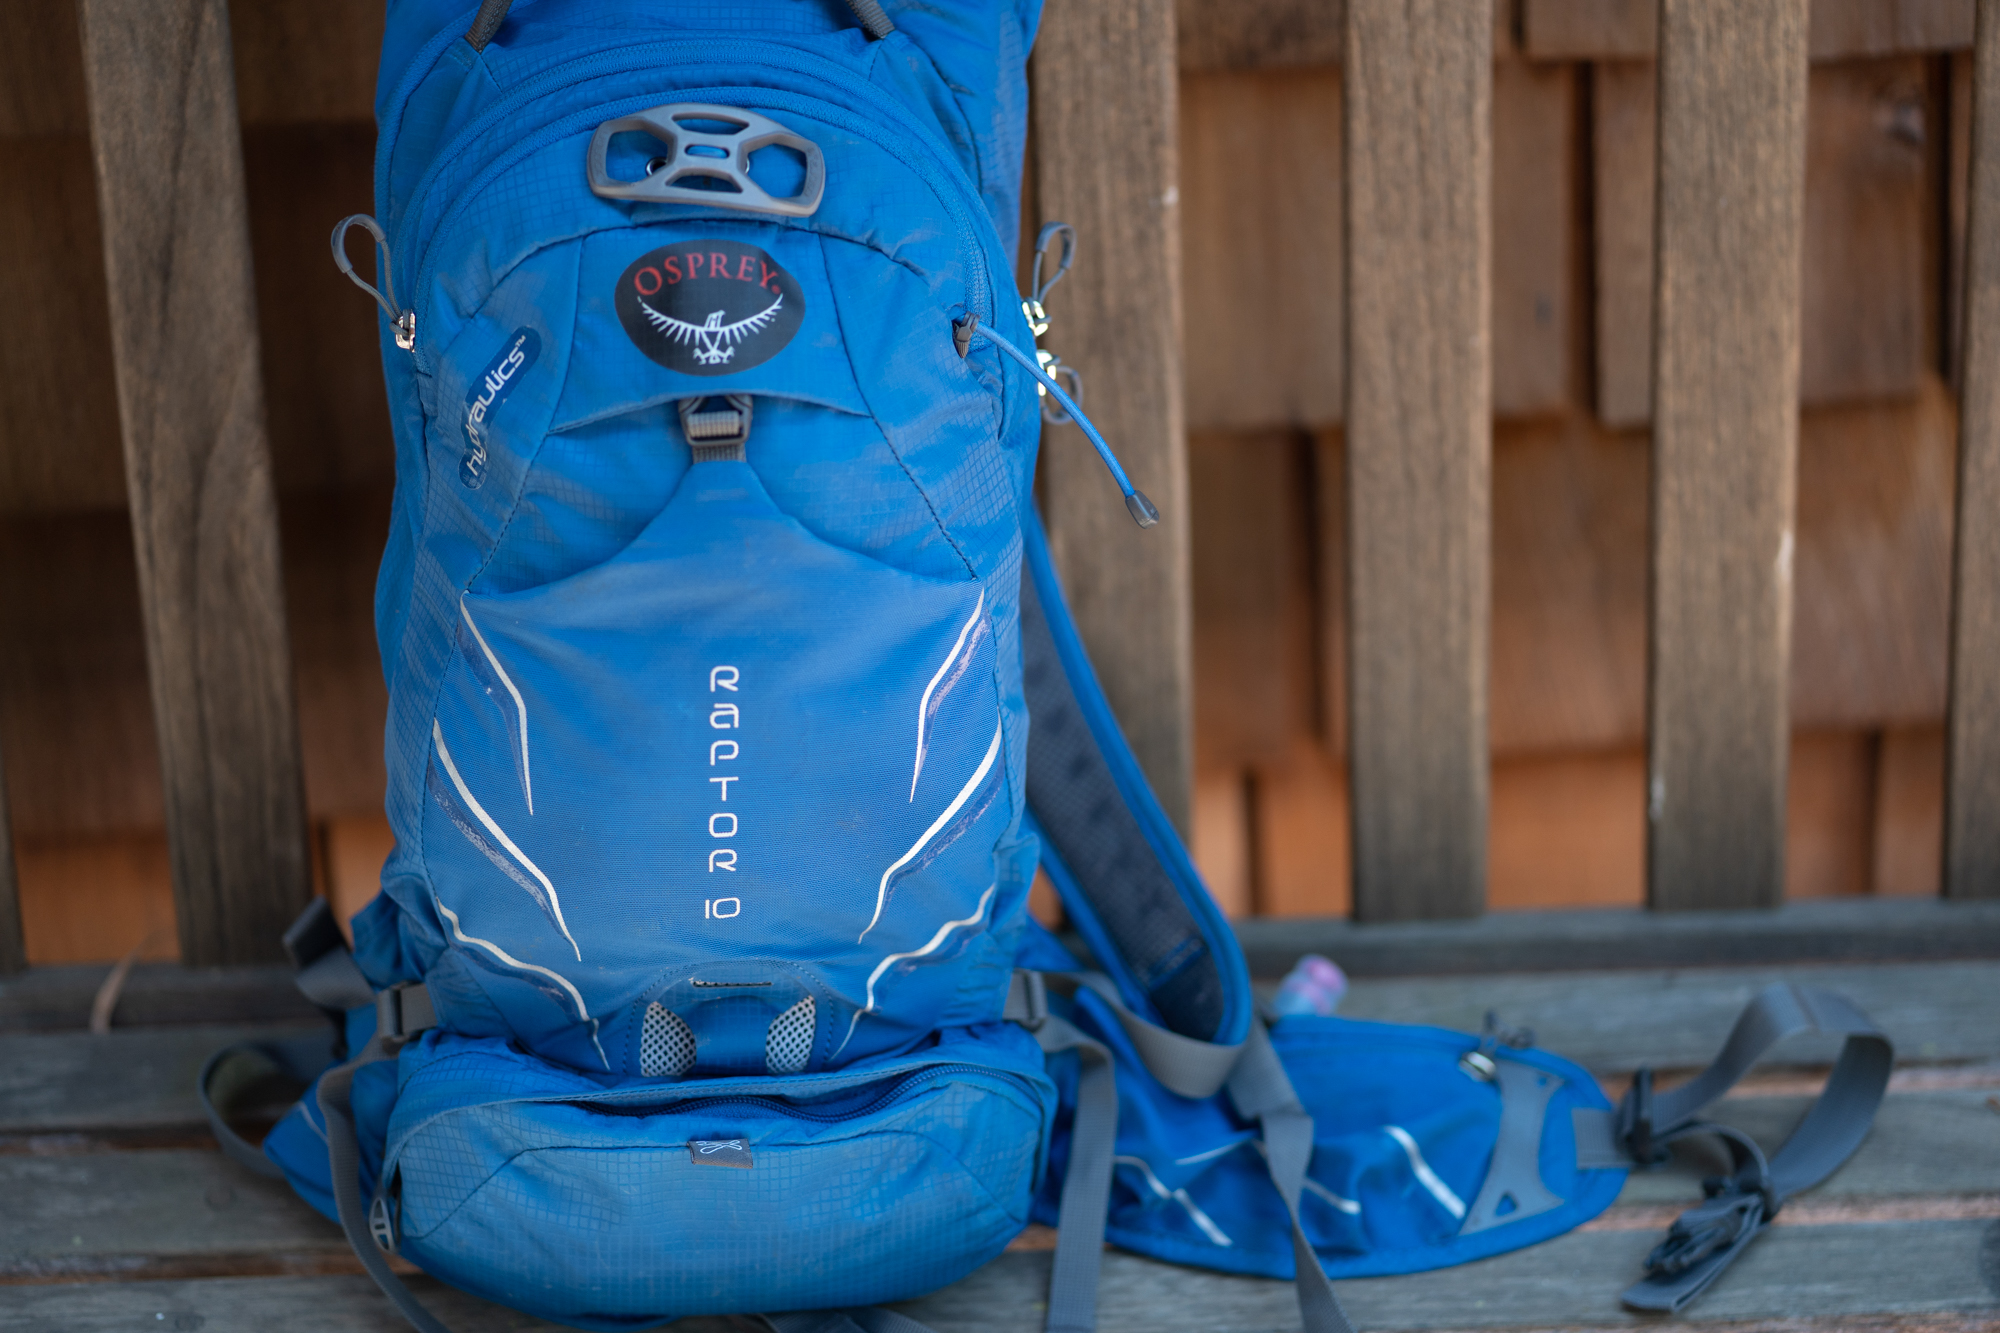 Osprey Raptor 10 Hydration Pack – Favorite MTB and hiking pack – What’s in my bag?